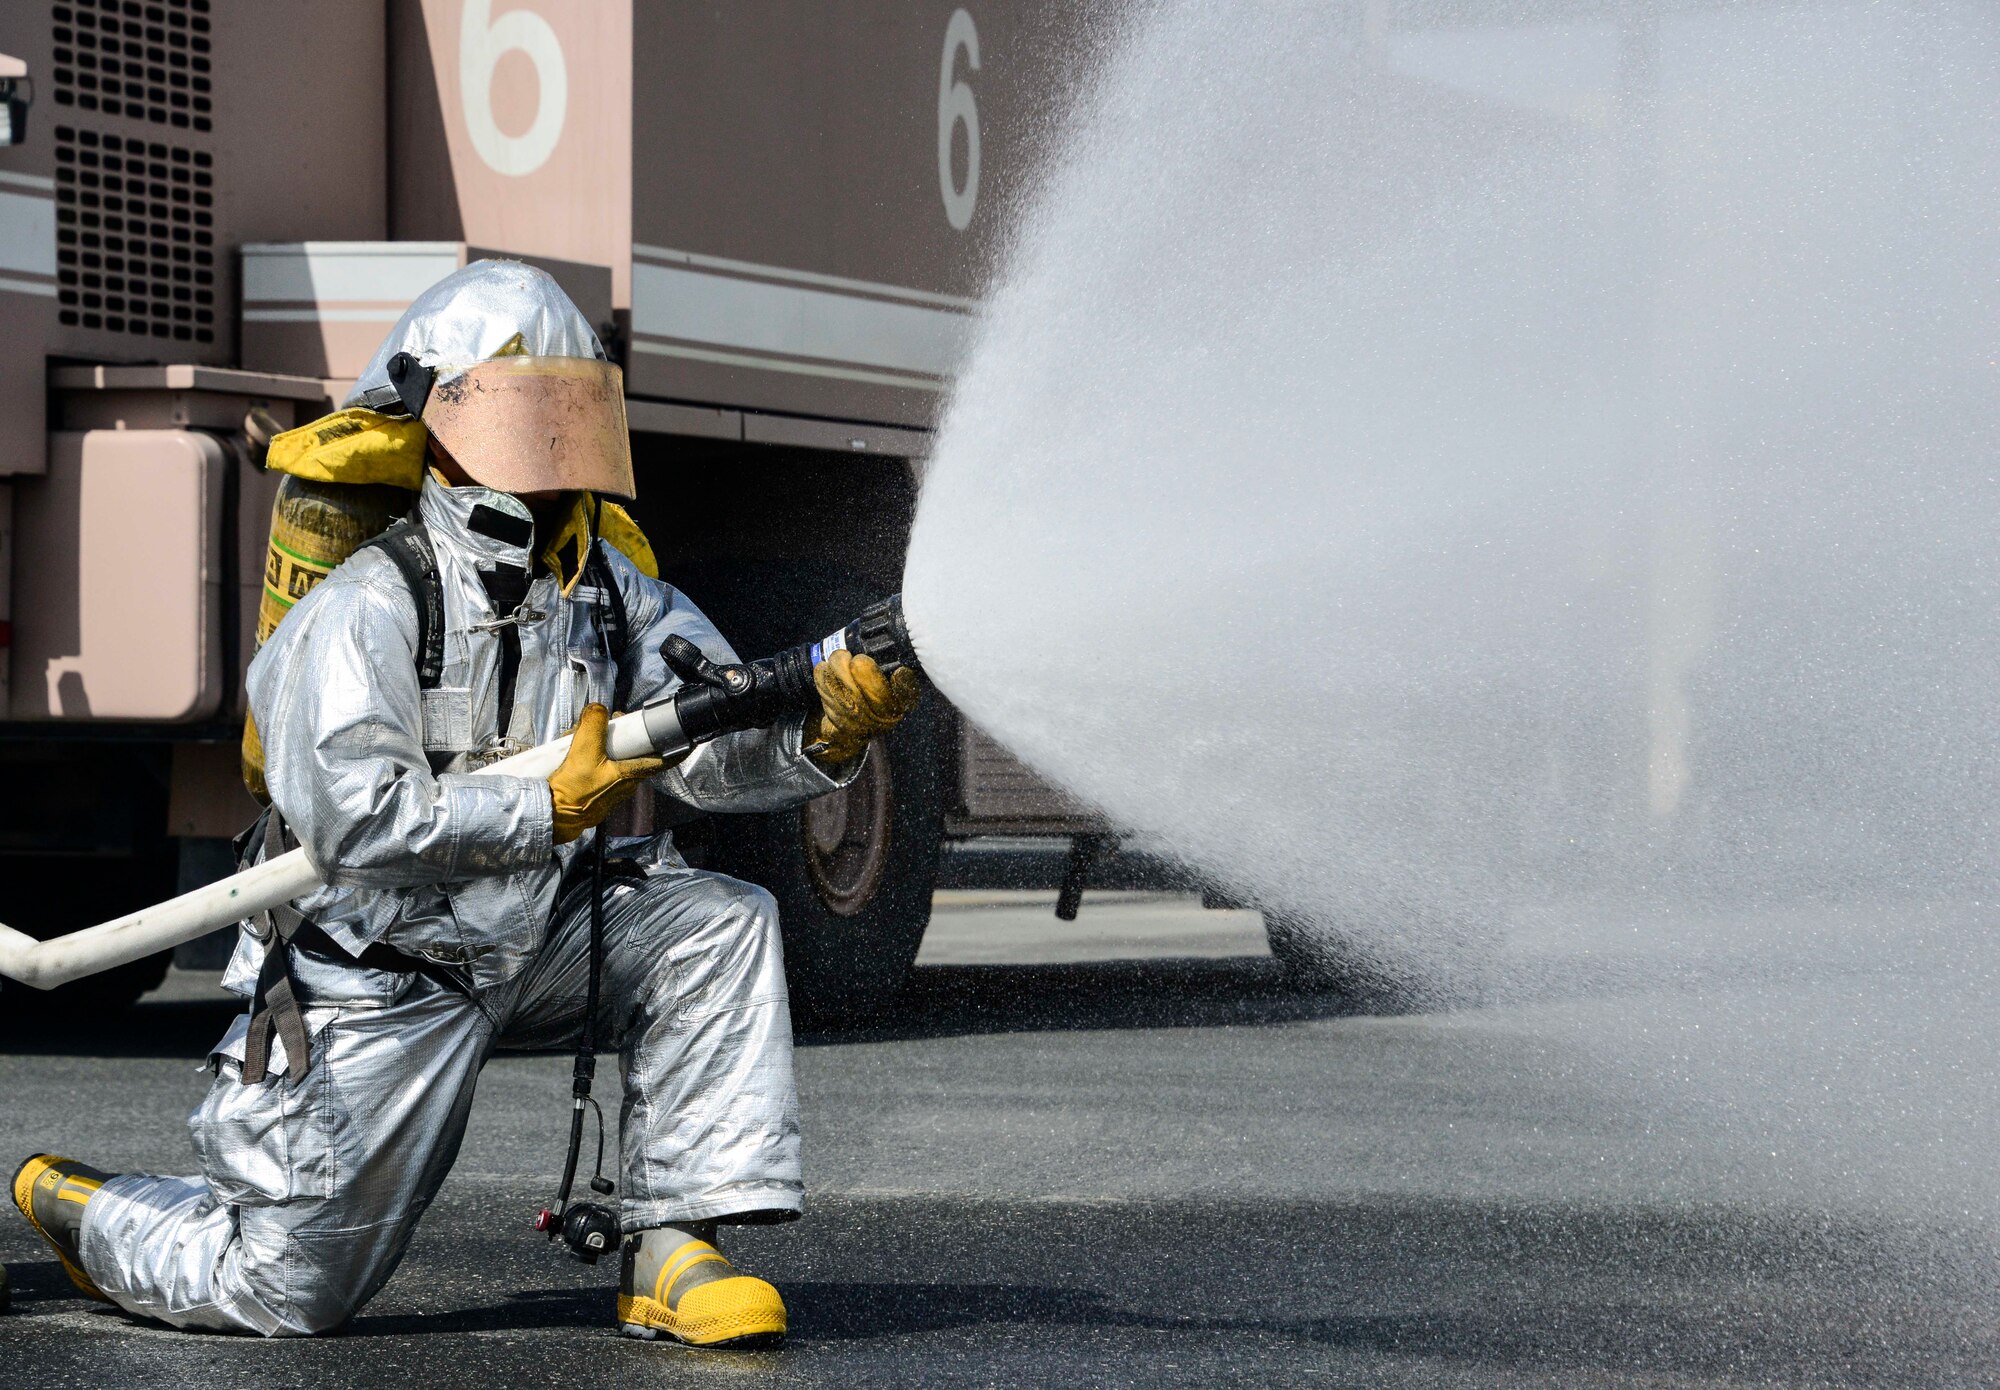 Senior Airman Dashawn Gilford, 379th Expeditionary Civil Engineer Squadron firefighter, advances a 1 ¾-inch hand line, which sprays in a fog pattern June 24, 2016, at Al Udeid Air Base, Qatar. Most Air Force and Department of Defense firefighters work 72 consecutive hours each week providing fire and emergency services to the aircraft and the base. The 379th ECES fire department works with coalition and host nation partners in support of several types of aircraft on base. (U.S. Air Force photo/Senior Airman Janelle Patiño/Released)